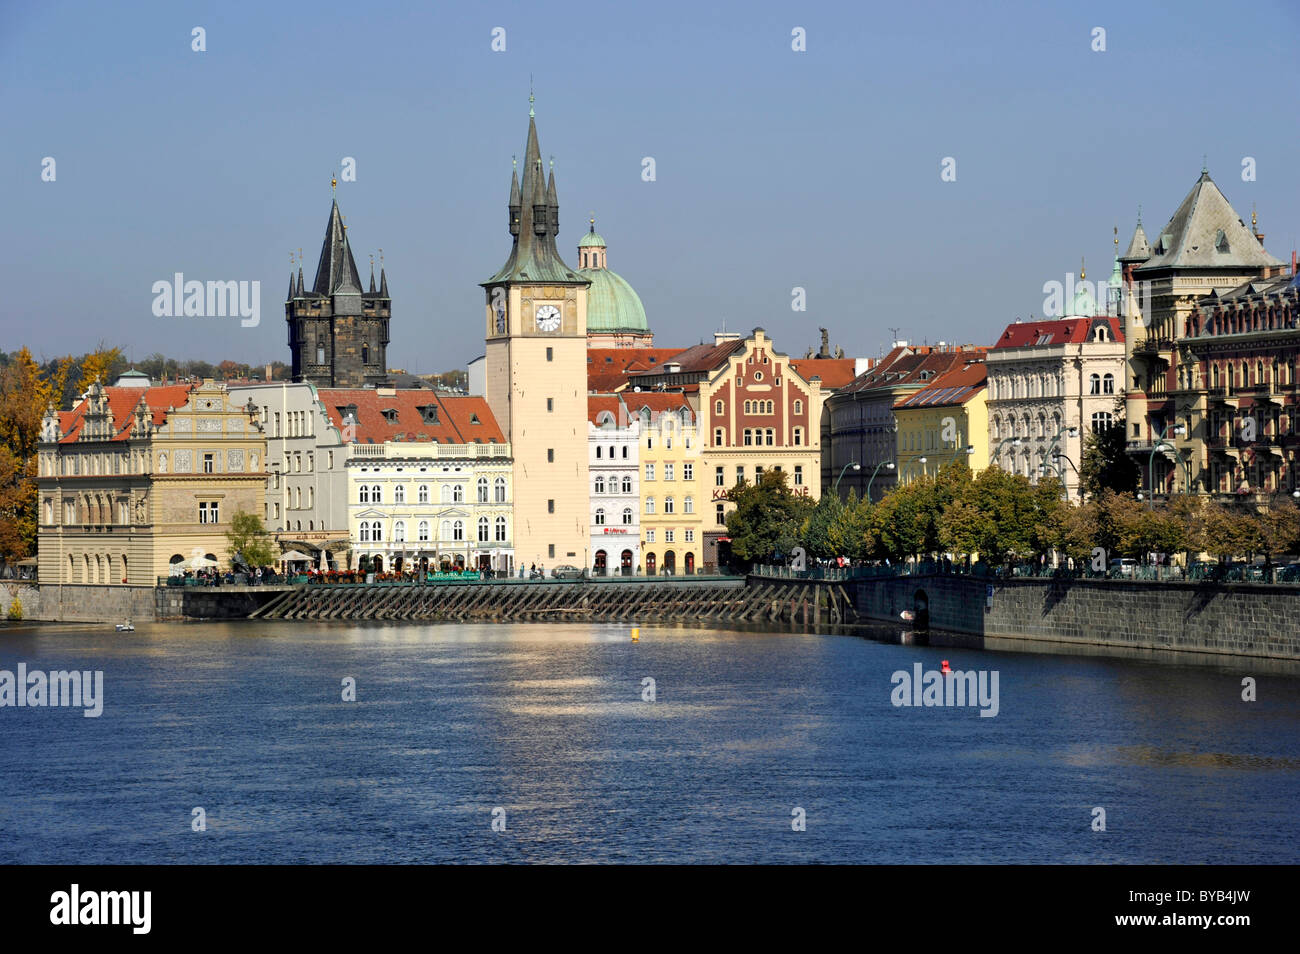 Vltava river, Smetana Museum in the former waterworks, the Old Town Bridge Tower, water tower, dome of the Cross Church, Prague Stock Photo